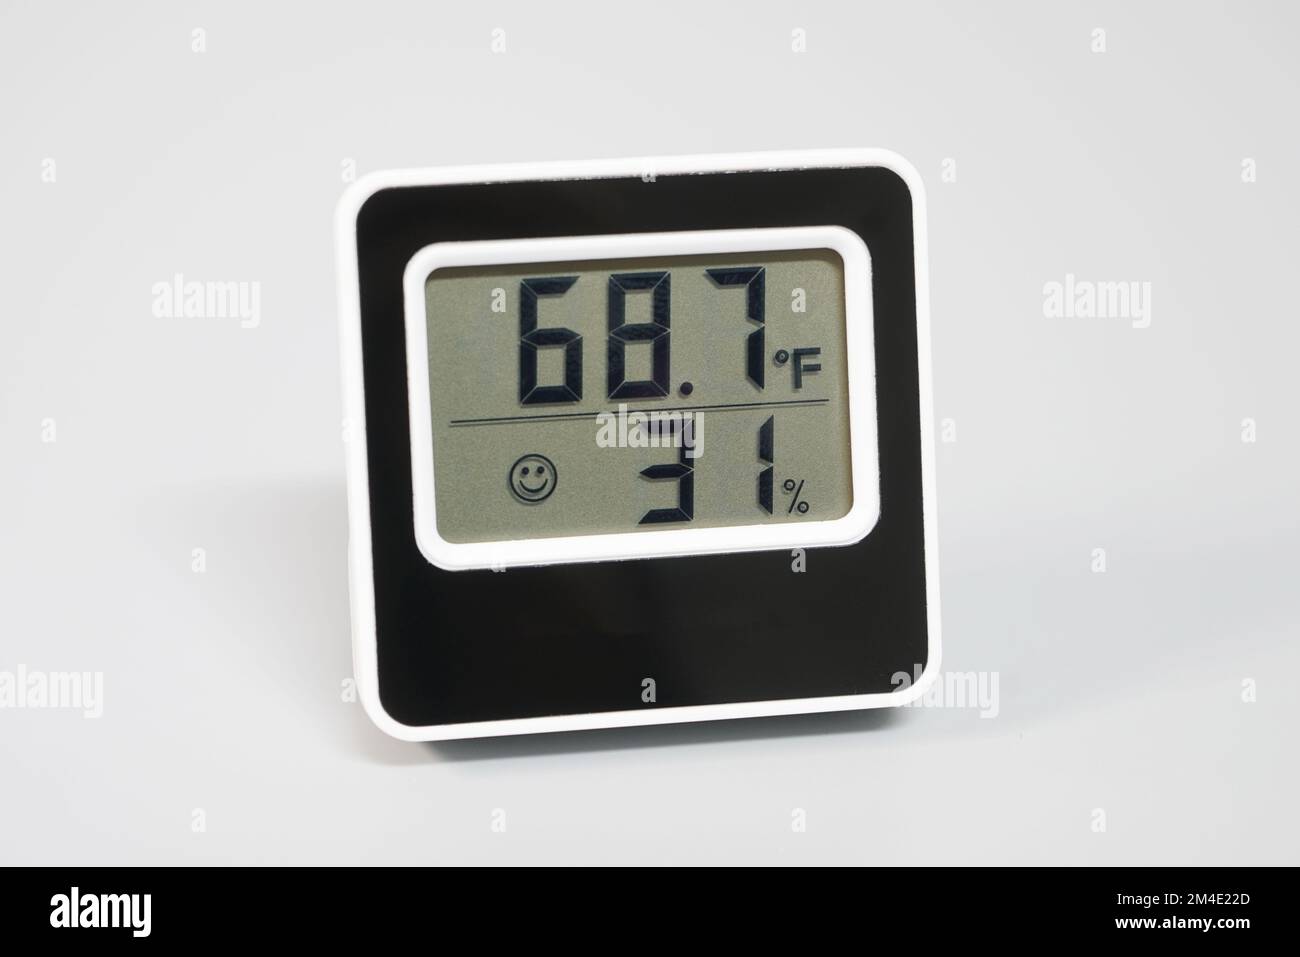 Small digital thermometer and hygrometer for measuring termperature and humidity. Stock Photo